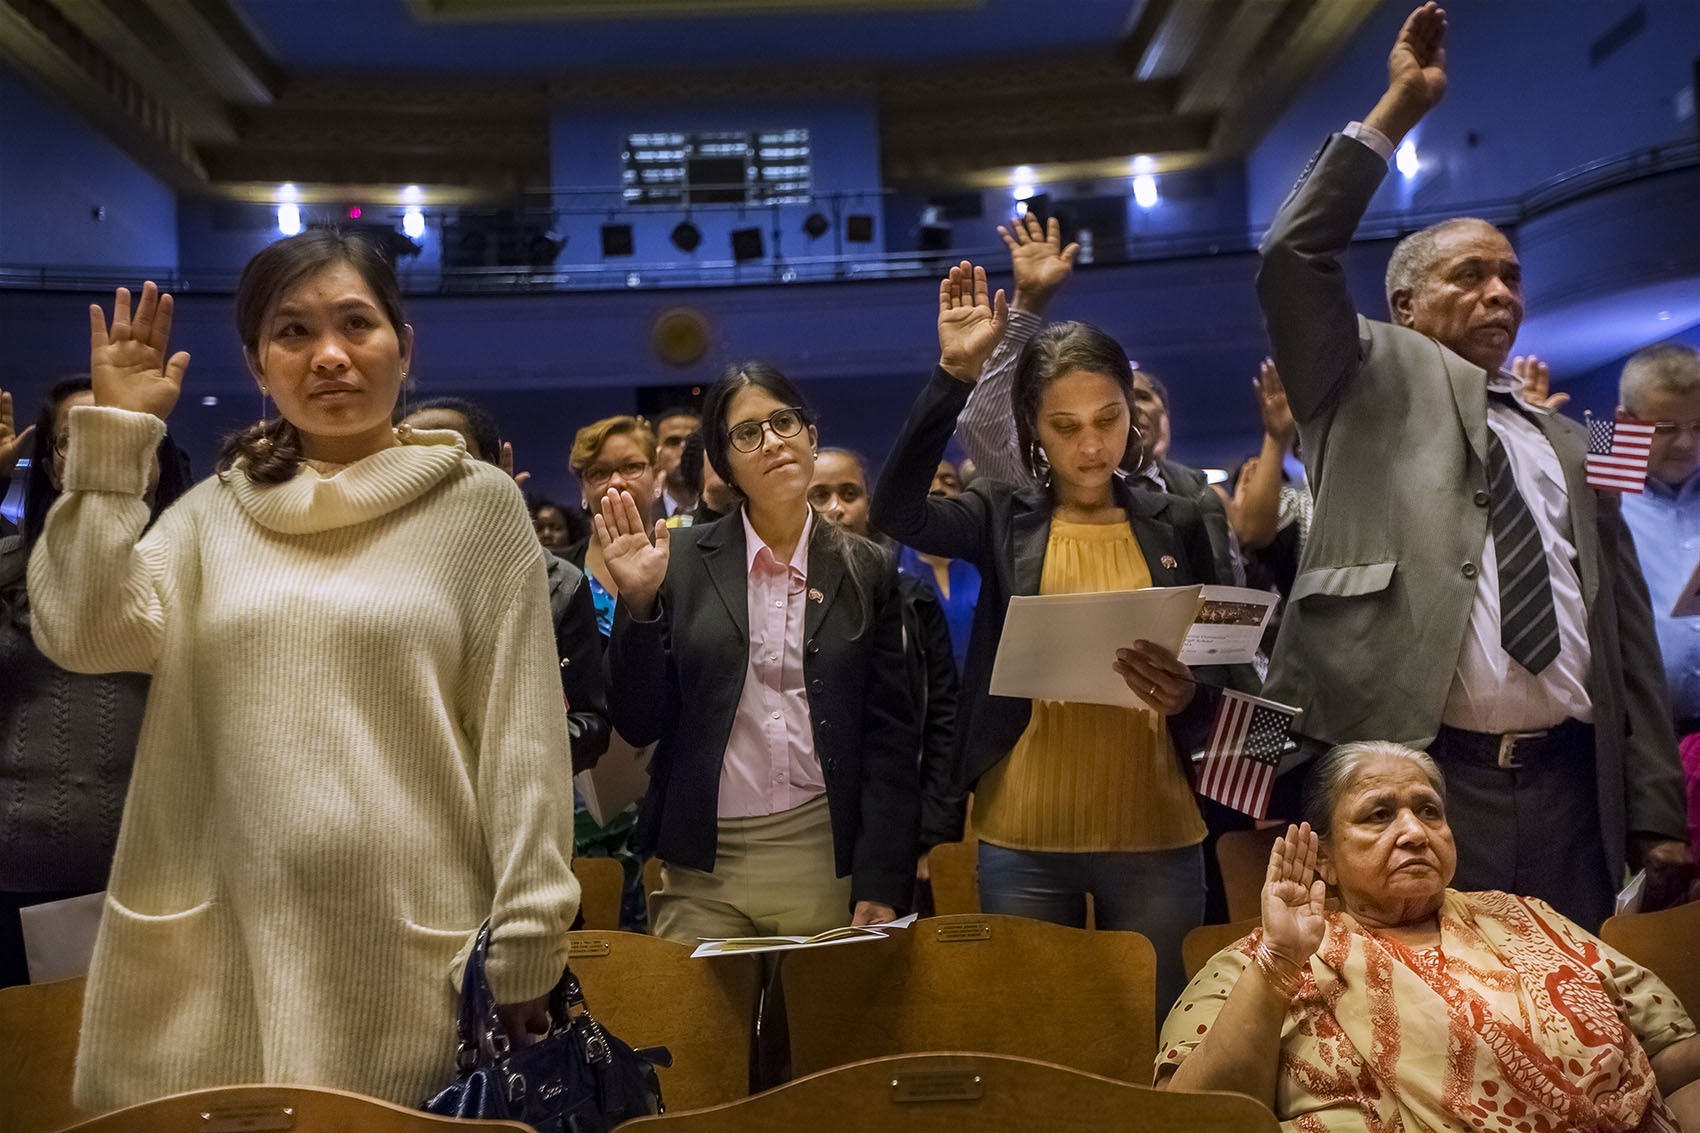 Close to 150 naturalization applicants took the Oath of Allegiance during a ceremony at Jenkins Auditorium at Malden High School on Oct. 18. (Jesse Costa/WBUR)